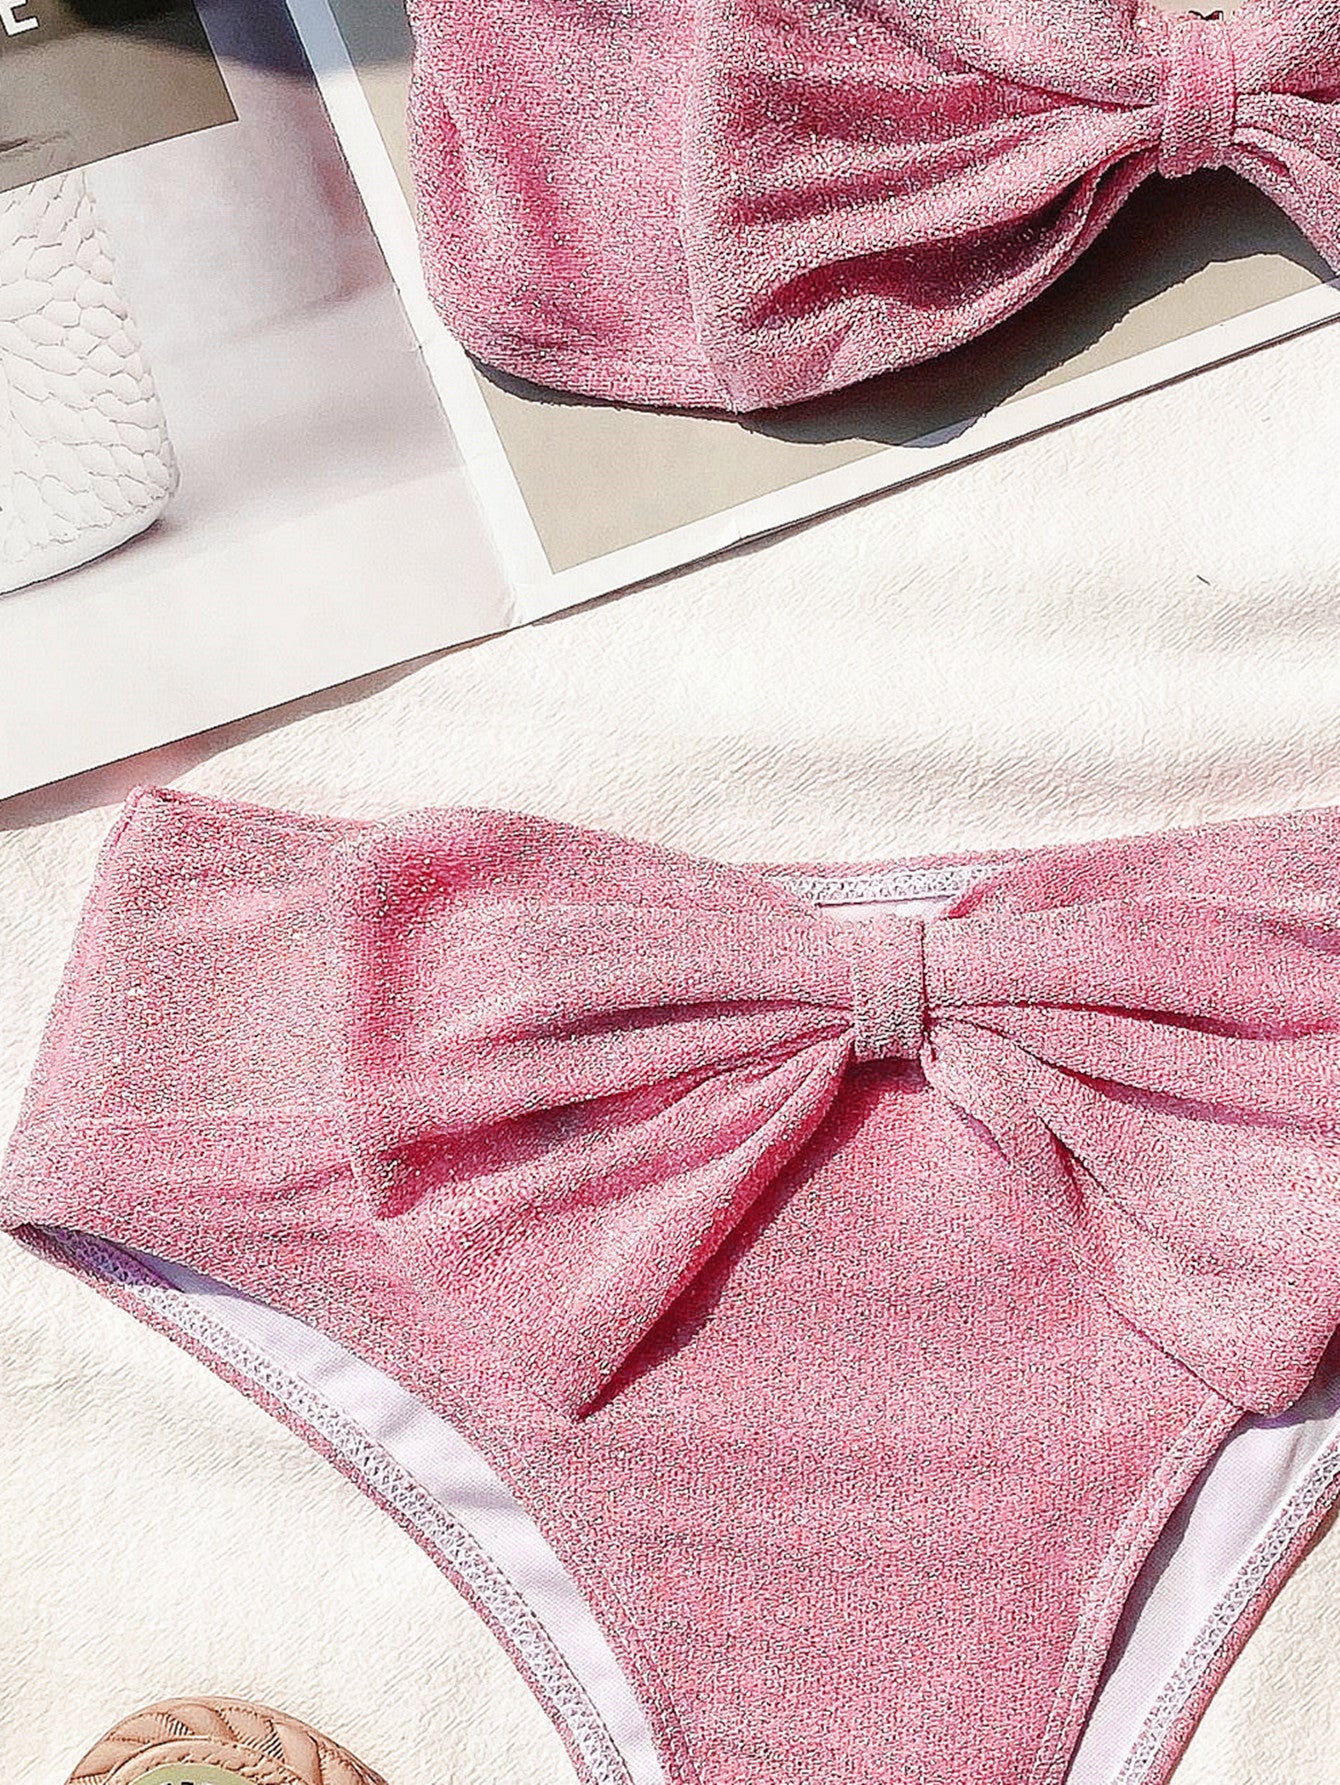 Pink Velvet High Waisted Bikini with Double Bows - Top and Bottom